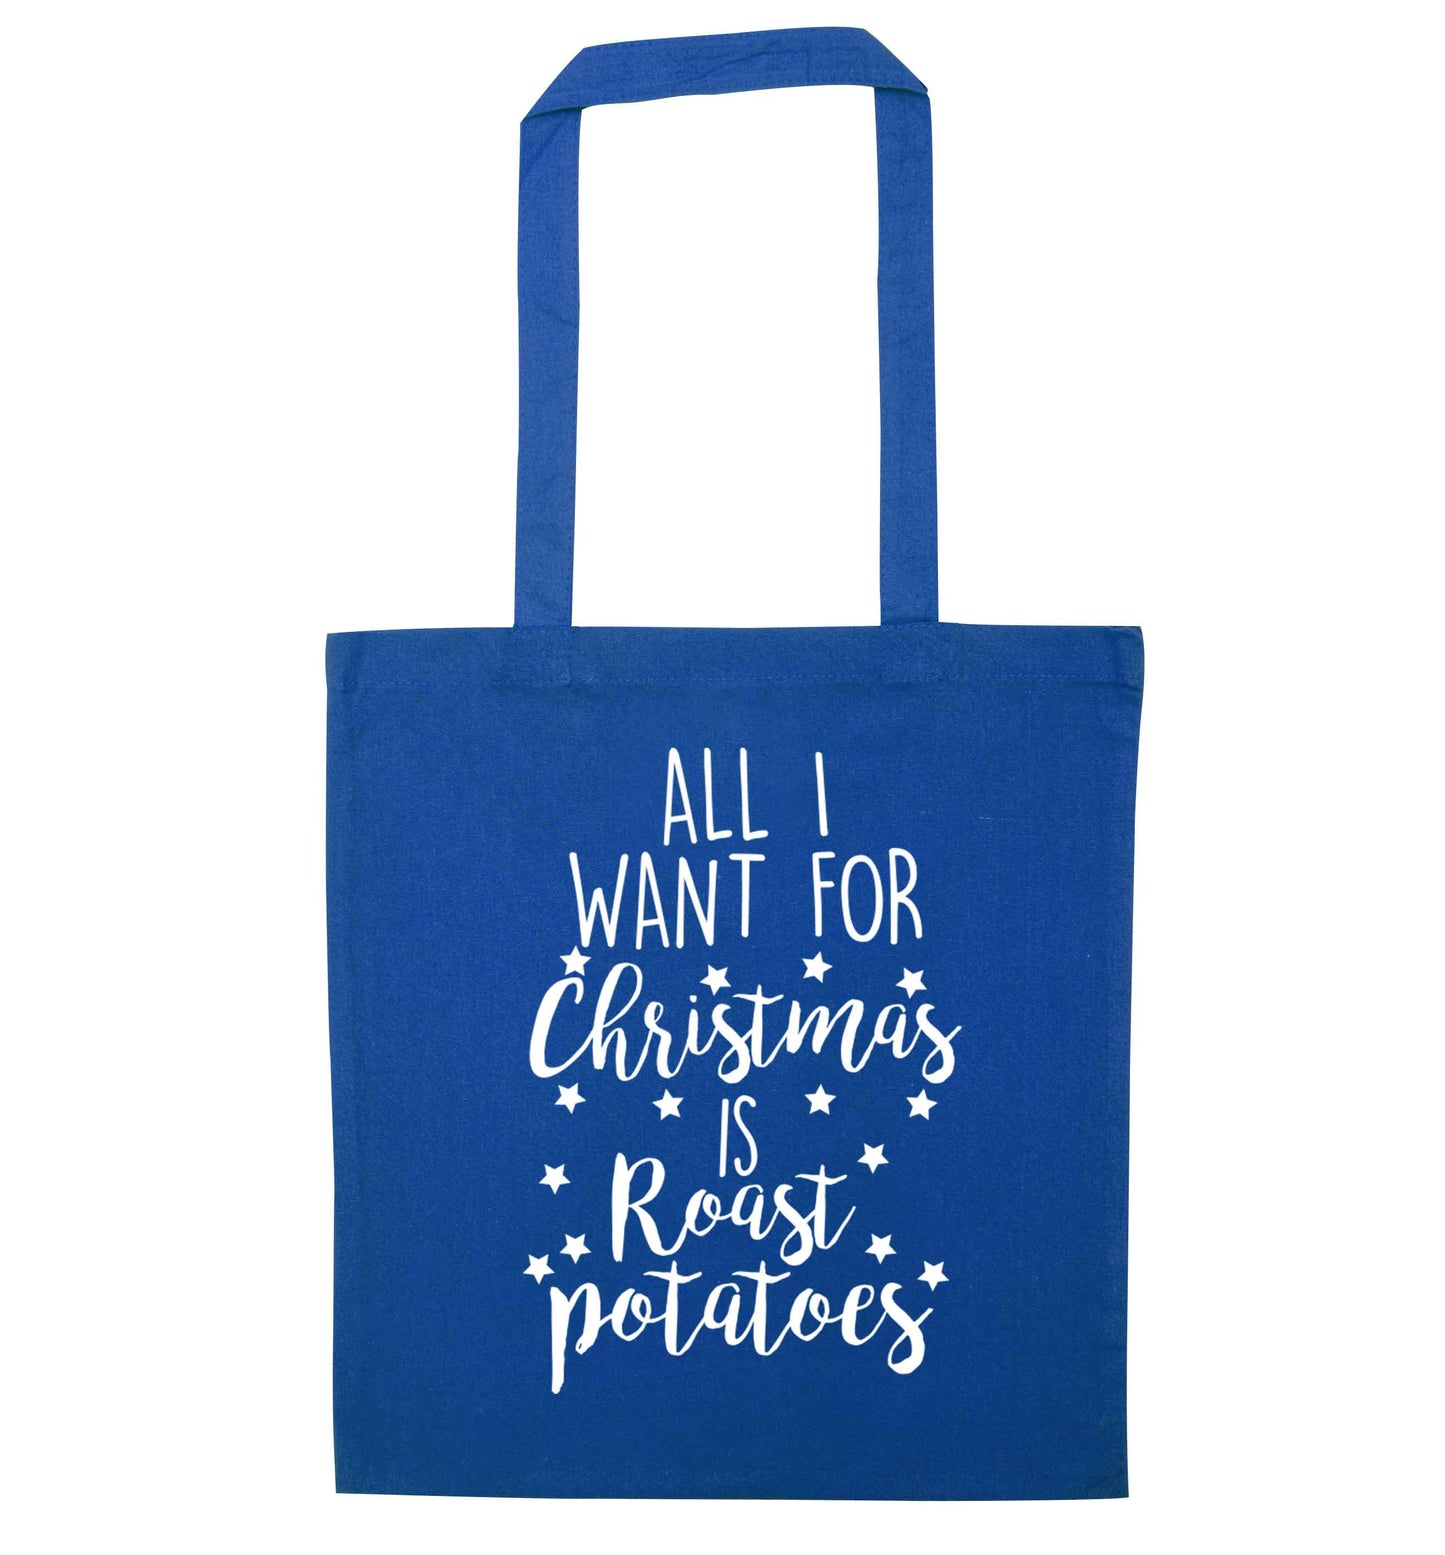 All I want for Christmas is roast potatoes blue tote bag